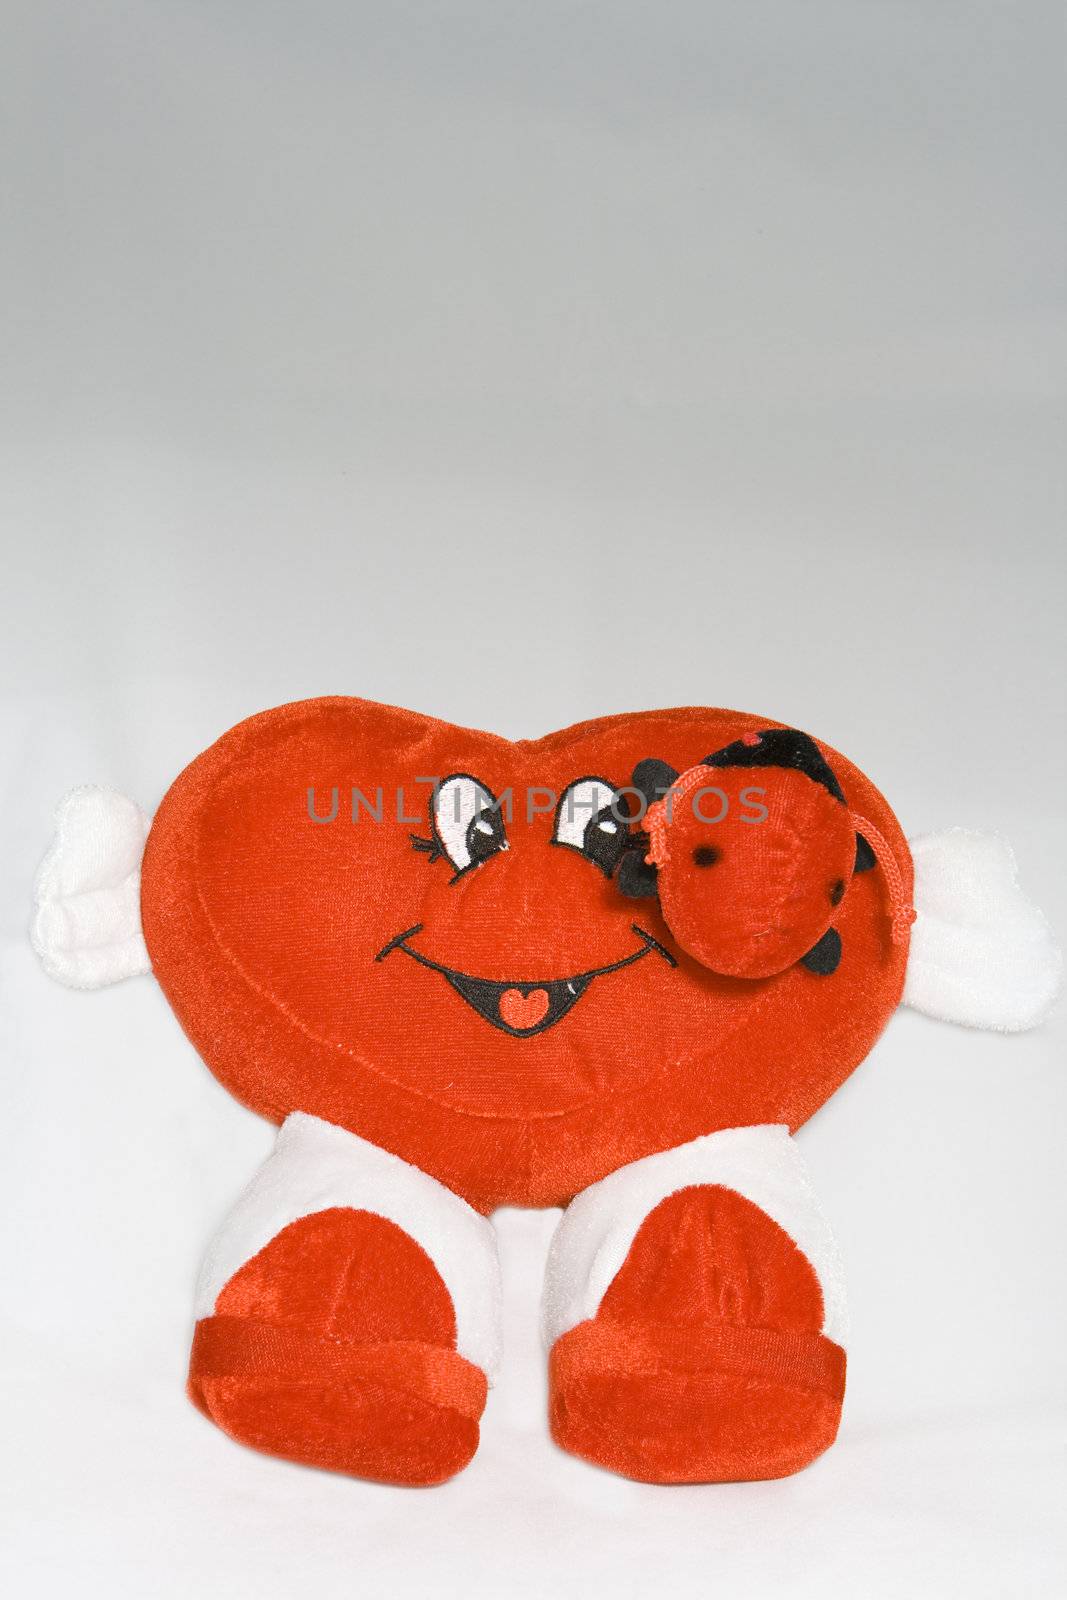 Heart shape toy with it's arms out welcoming love